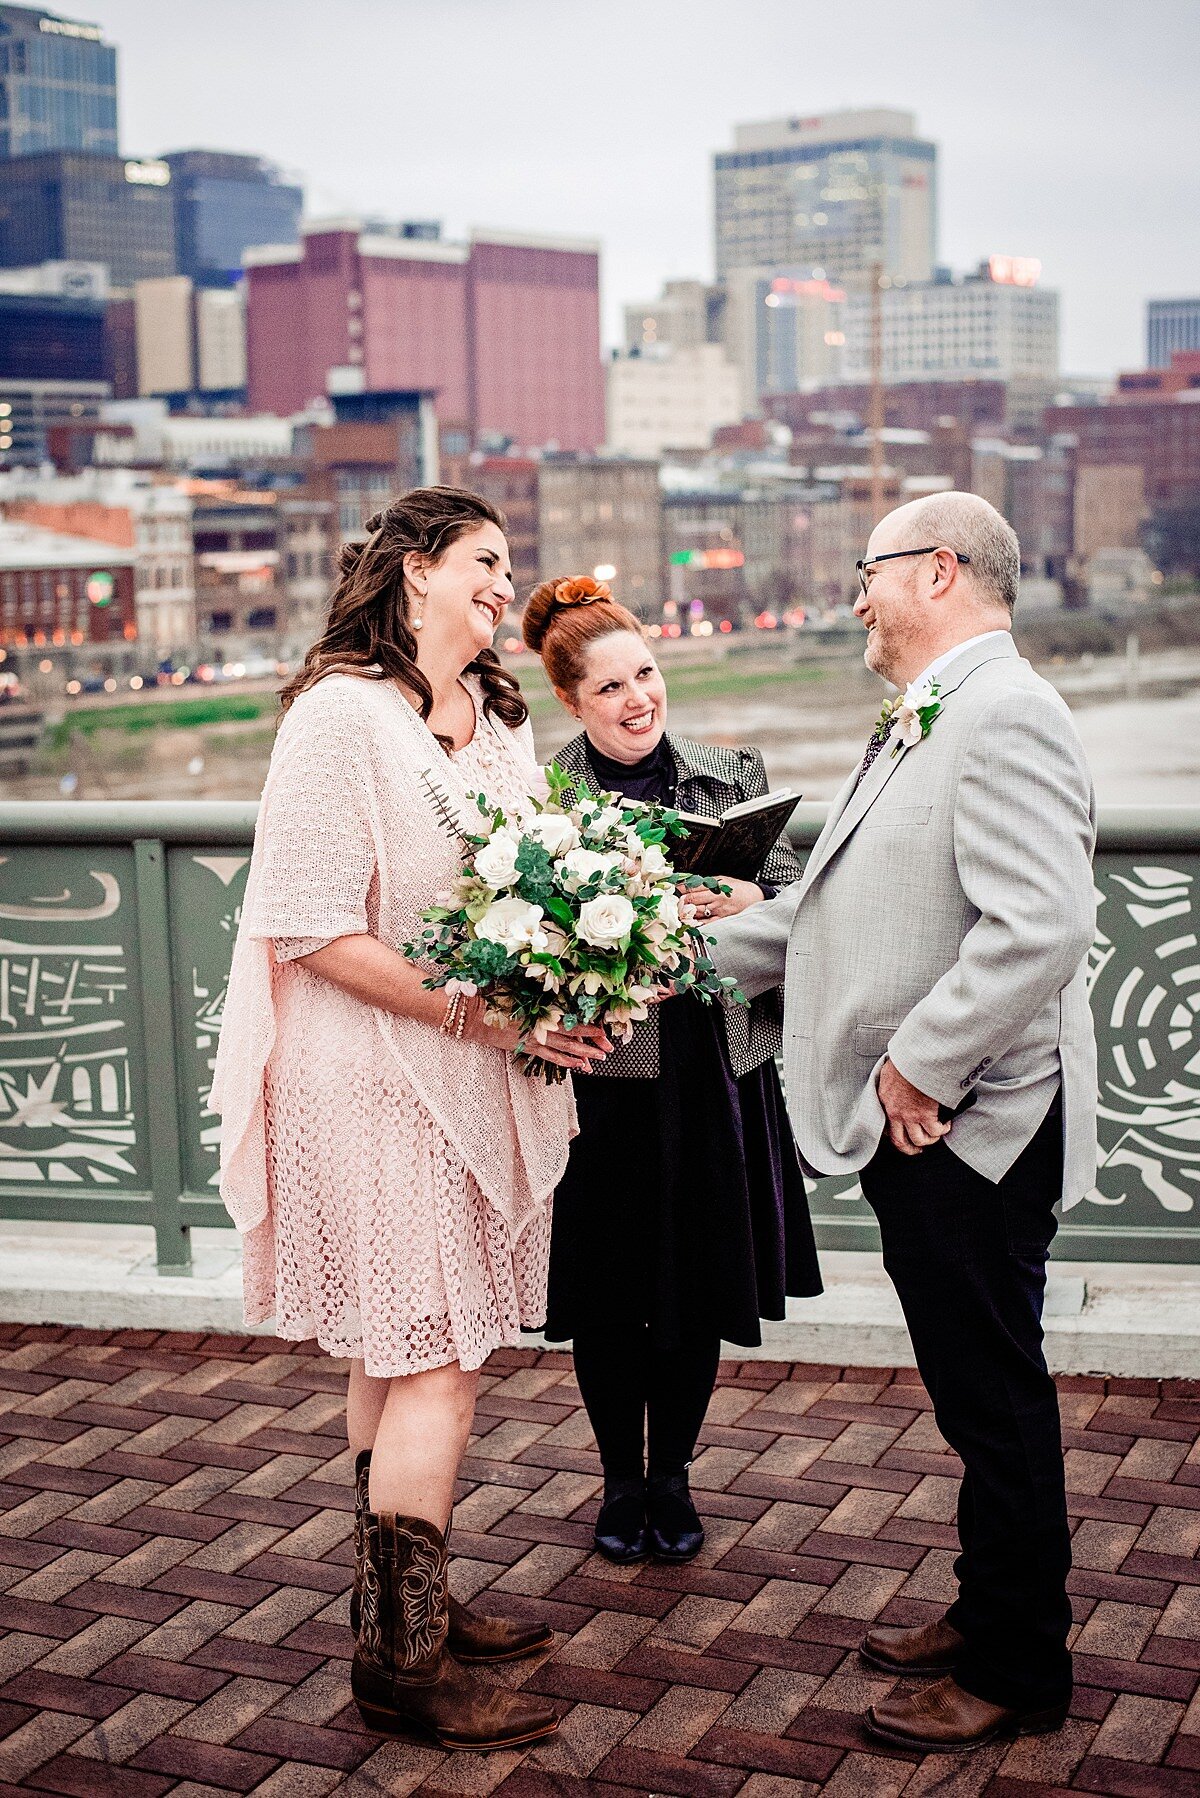 The bride and officiant bother smile at the groom during the wedding ceremony on the pedestrian bridge in Nashville. The Nashville skyline is behind them. The bride is wearing a flowing blush  gauze  dress that comes to her knees with brown cowboy boots. She is holding a large white bouquet of flowers with greenery. The officiant is wearing a black dress and she is holding a leather bound book. Her red hair is up in a structured bun. The groom is wearing black pants and a light gray jacket. His hands are in his pockets.